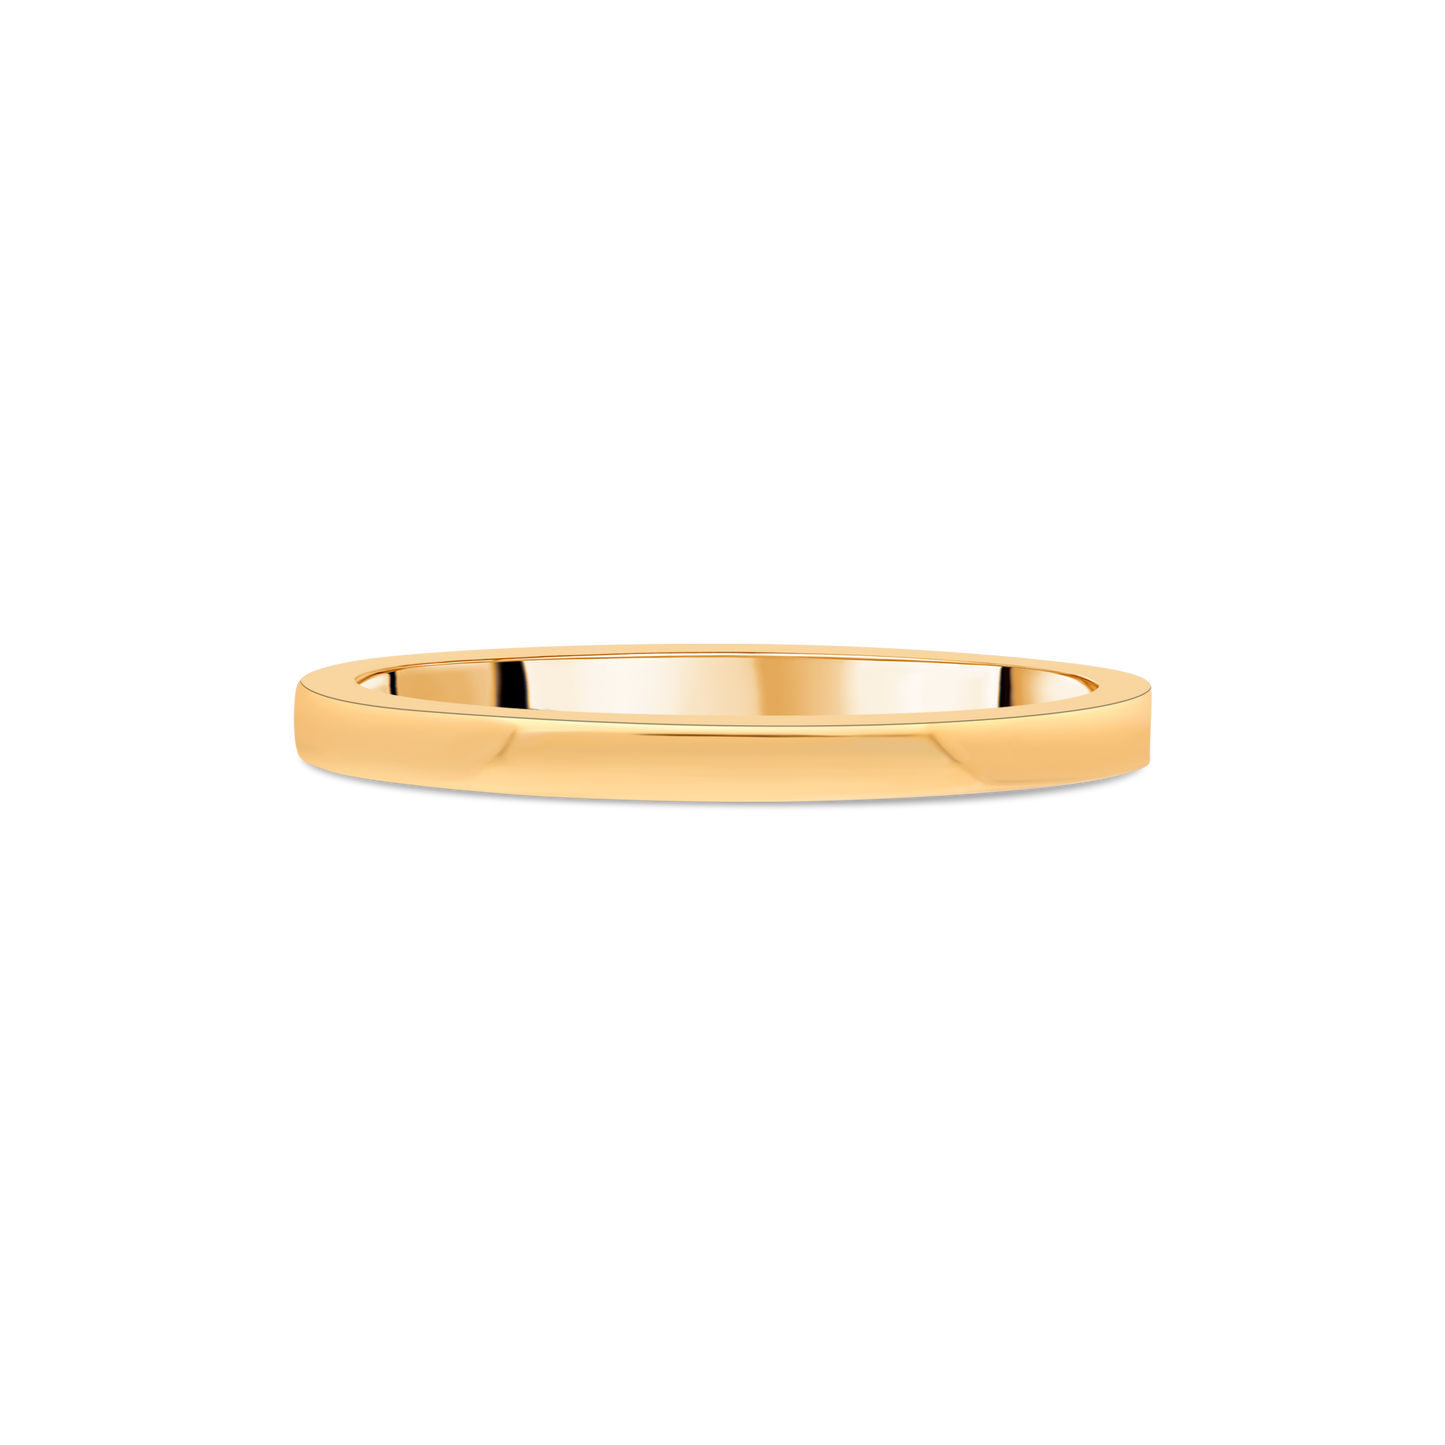 "Blush" Rose Gold 2mm Contemporary Comfort Fit Ladies Wedding Band